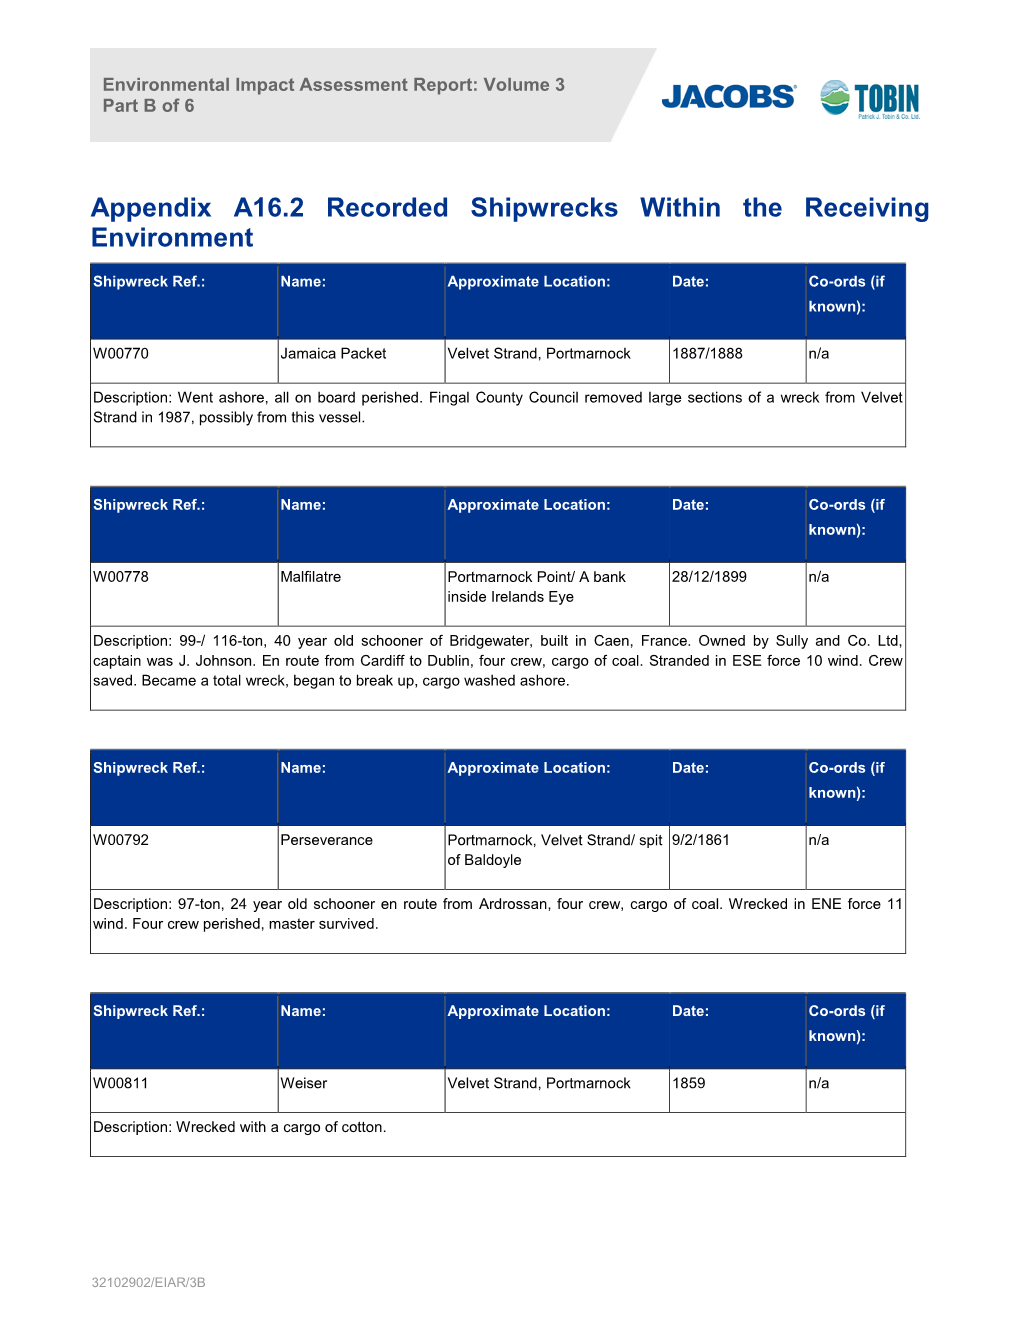 Appendix A16.2 Recorded Shipwrecks Within the Receiving Environment